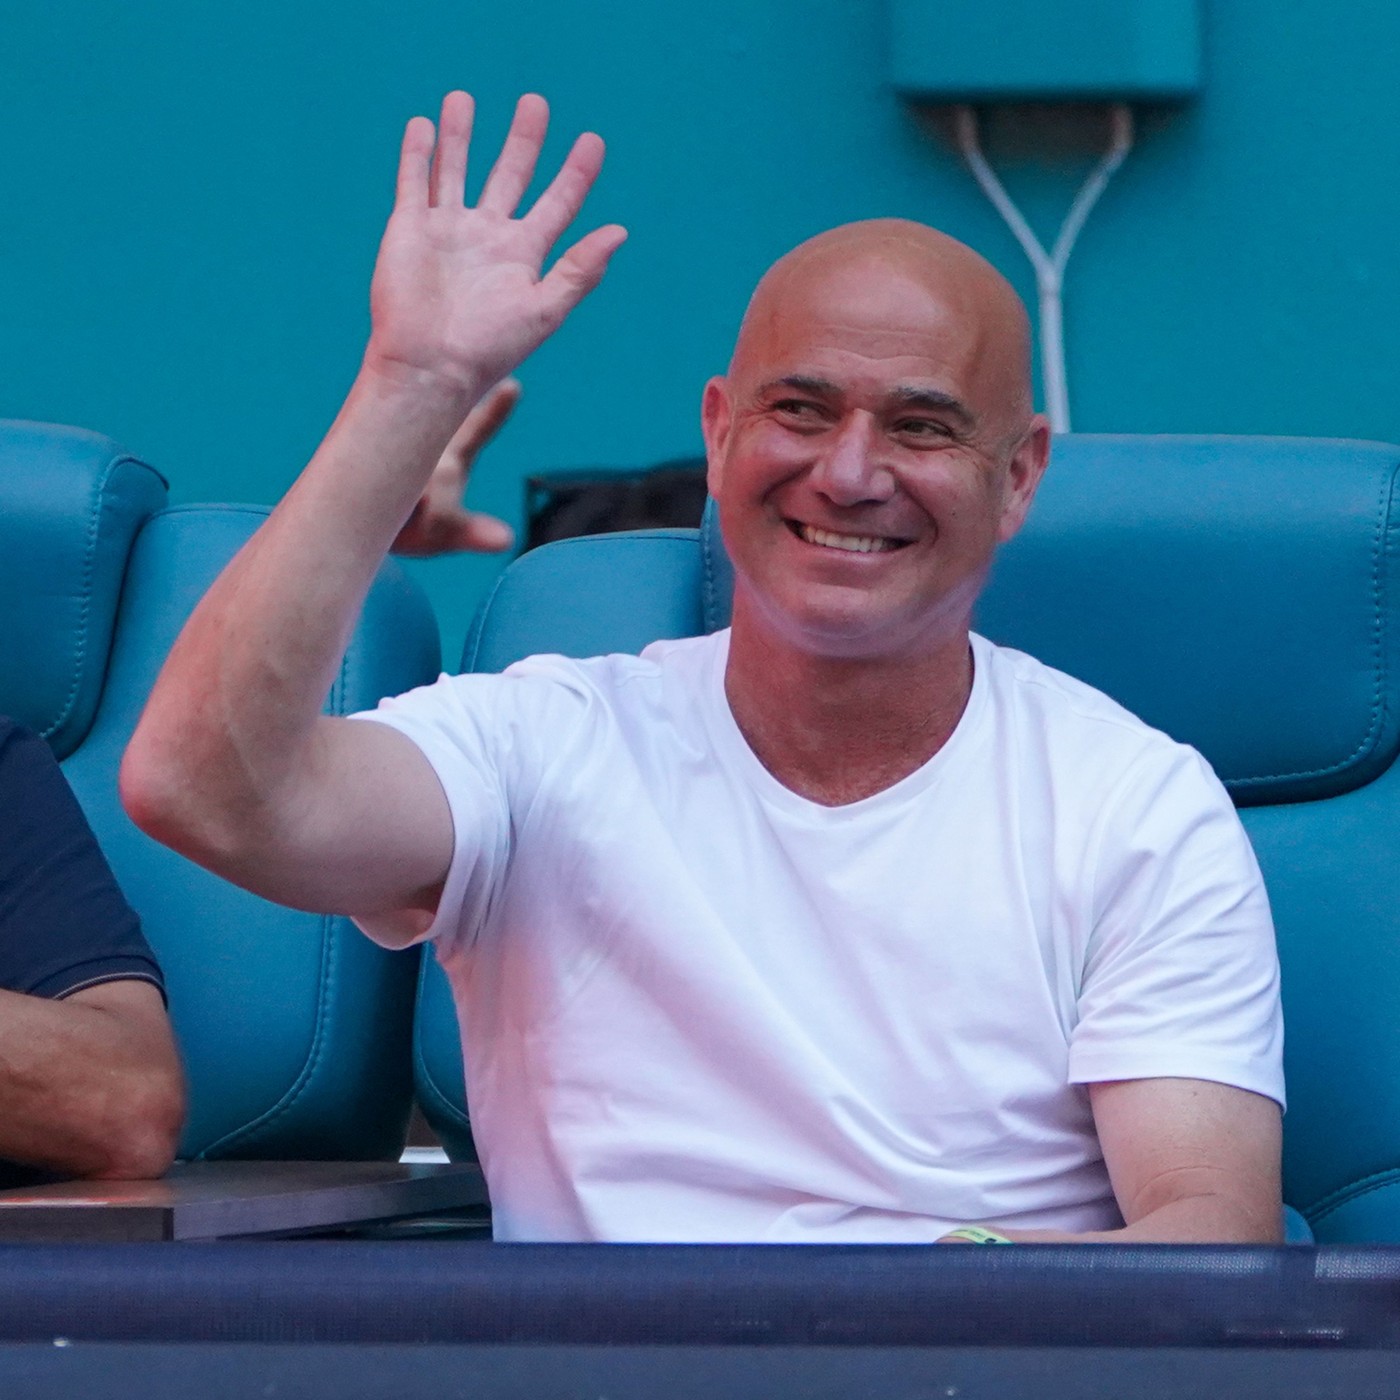 Andre Agassi attends 2024 Miami Open women's singles final match between Danielle Collins of United States and Elena Rybakina of Kazakhstan at Hard Rock Stadium on March 30, 2024 in Miami Gardens, Florida, United States
Andre Agassi attends 2024 Miami Open women's singles final match between Danielle Collins of United States and Elena Rybakina of Kazakhstan at Hard Rock Stadium, Hard Rock Stadium, Miami Gardens, Florida, United States - 30 Mar 2024,Image: 861687350, License: Rights-managed, Restrictions: , Model Release: no